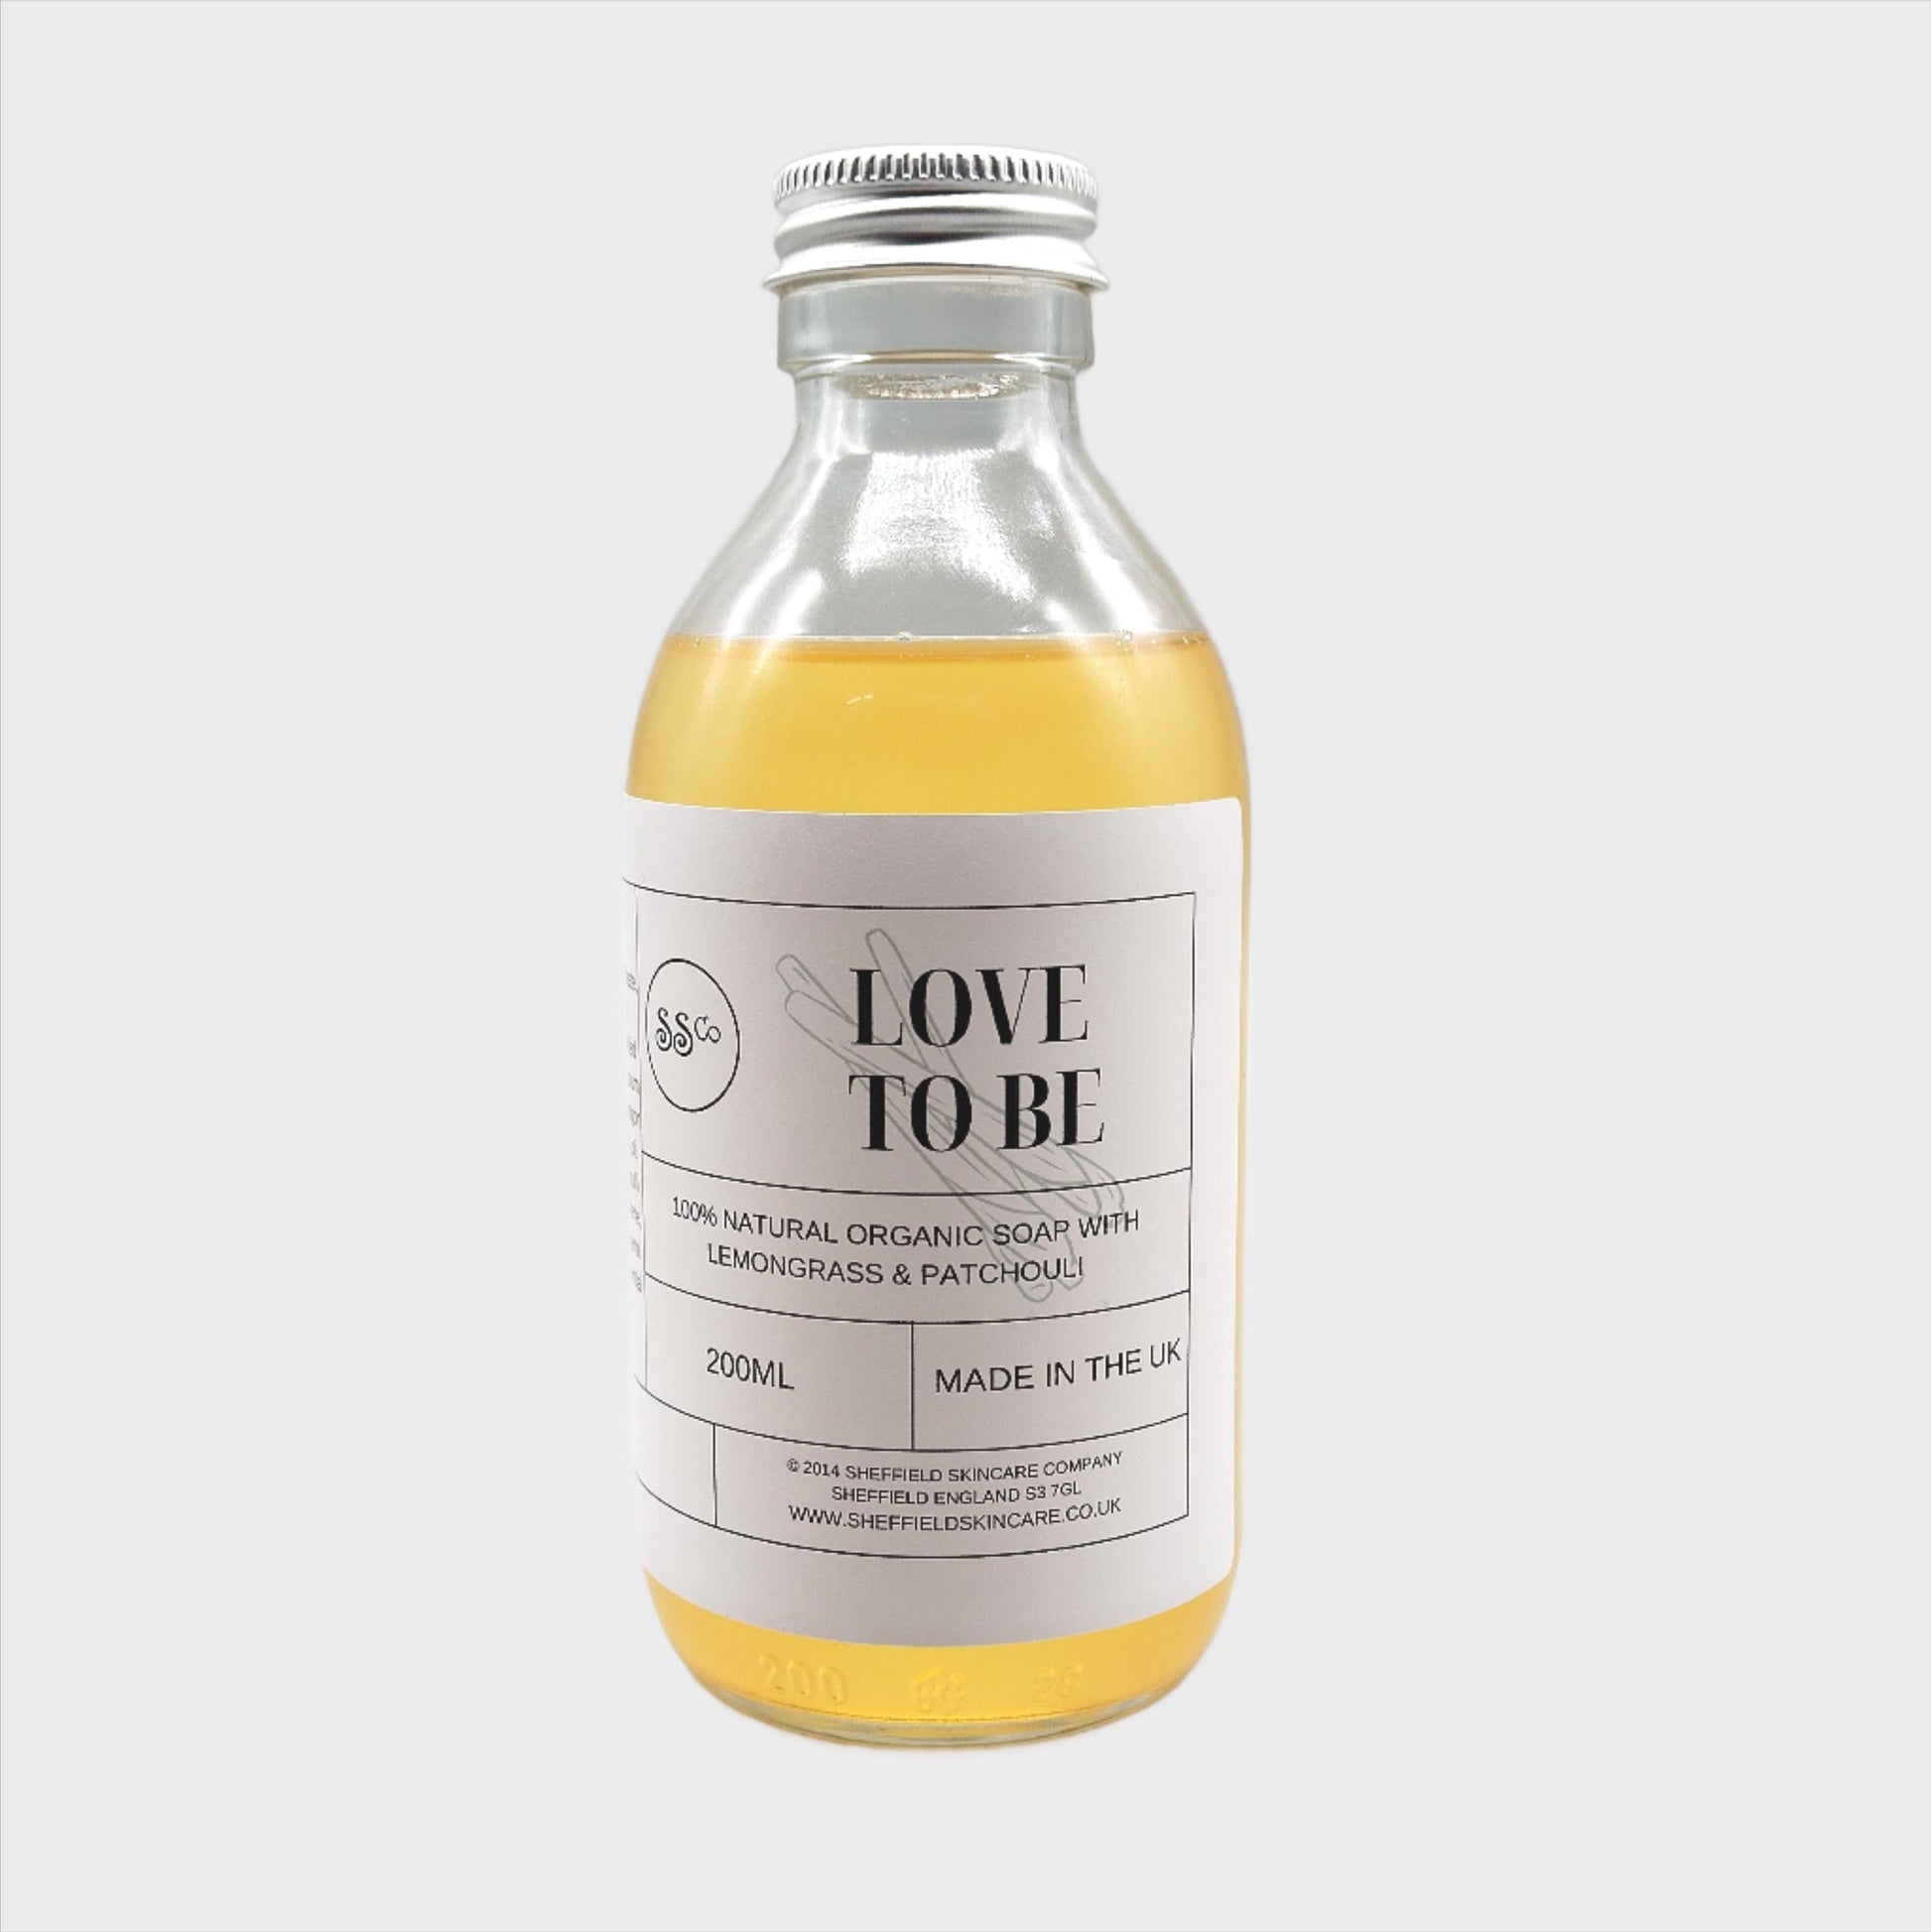 Love to be soap 200ml cap